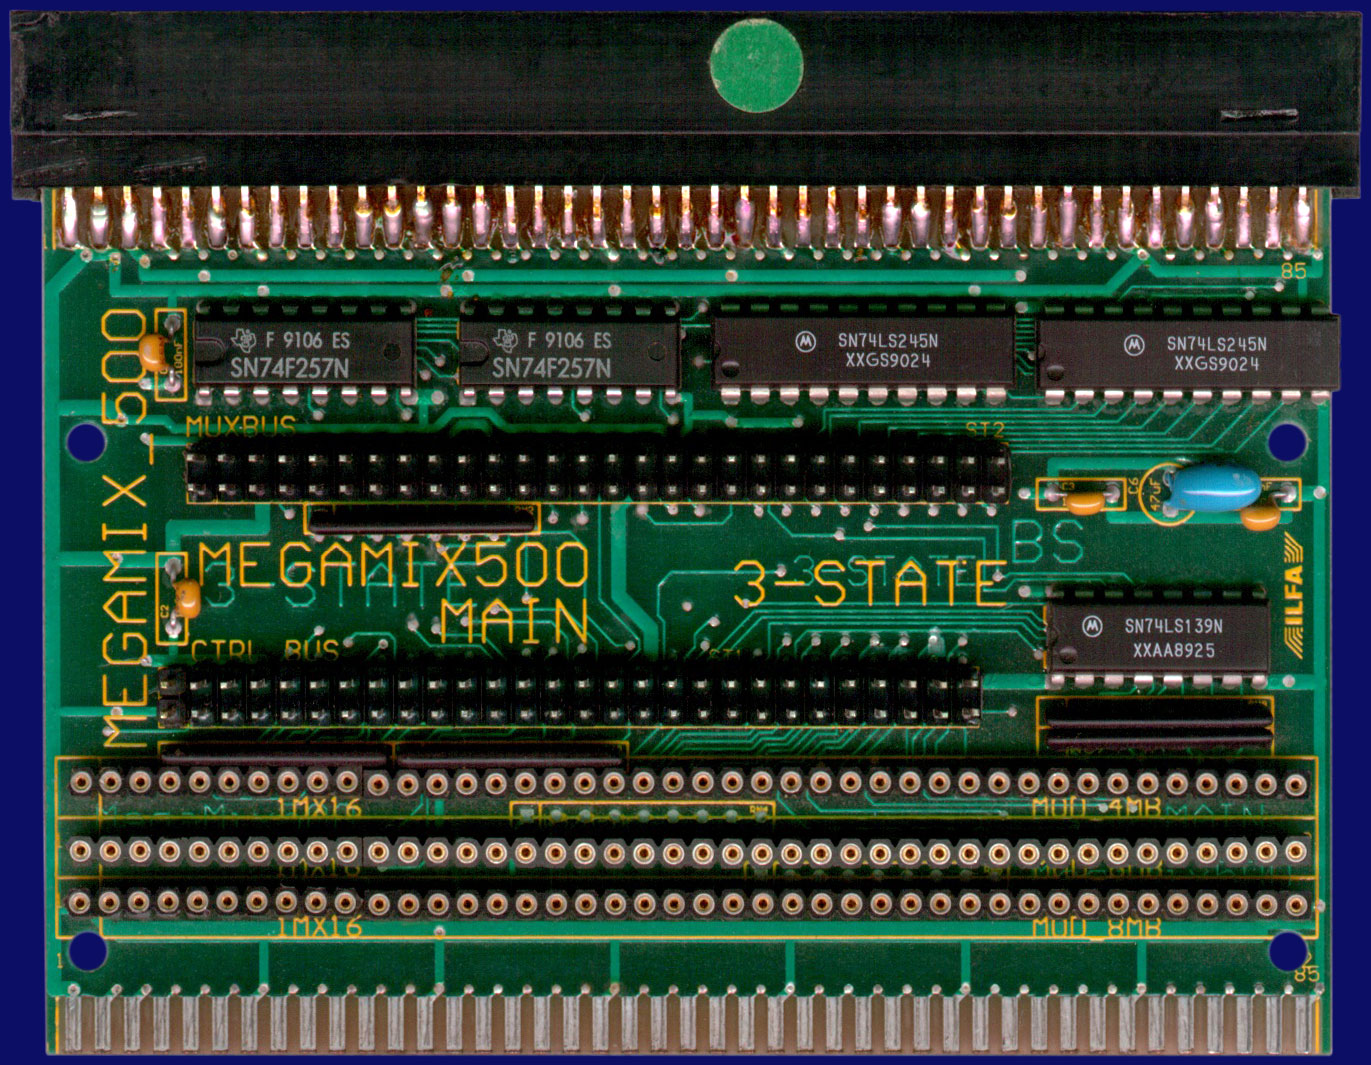 3-State MegaMix 500 - Main board, front side